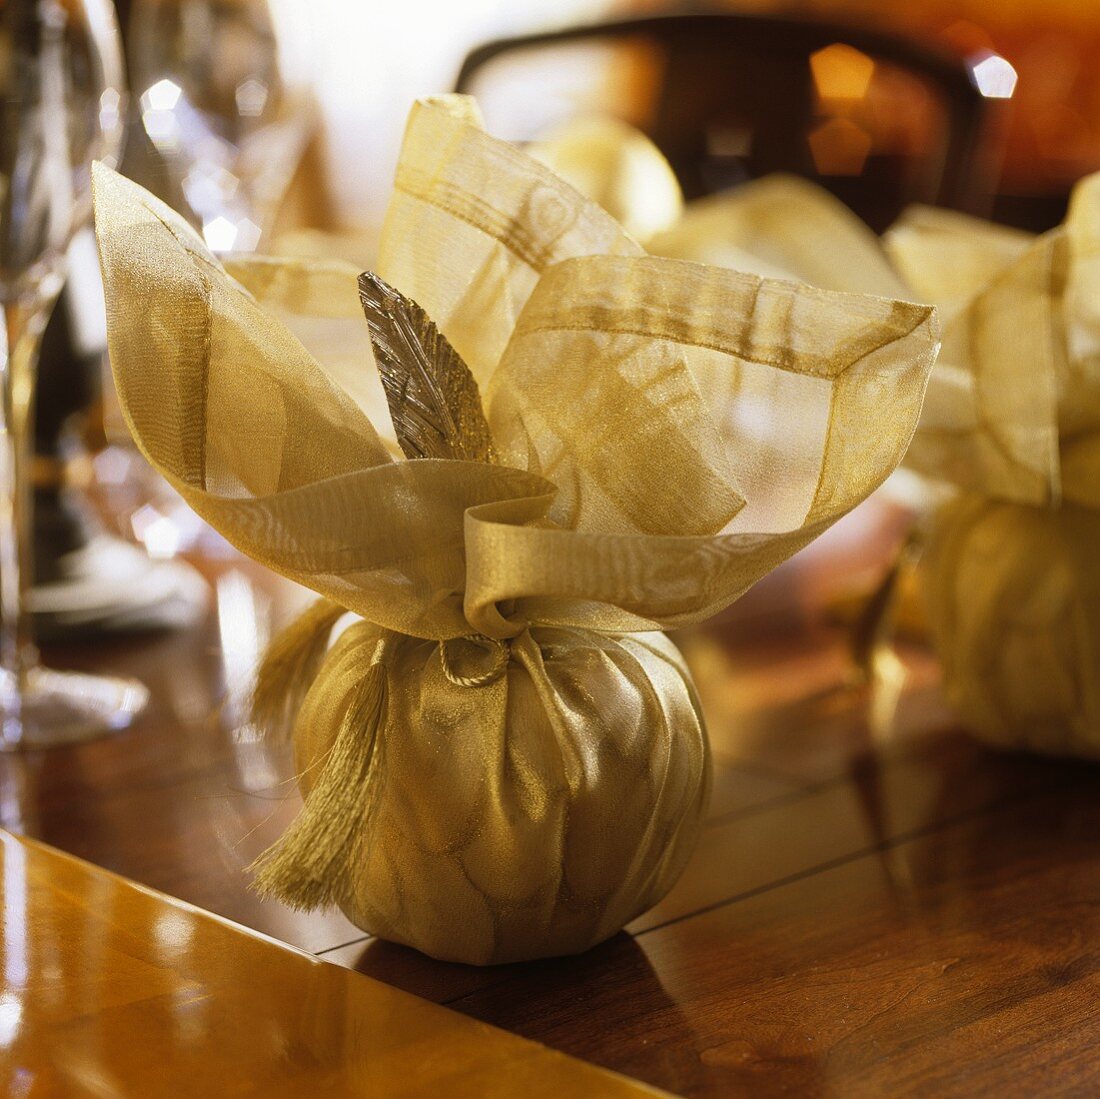 Christmas decorations wrapped in golden fabric